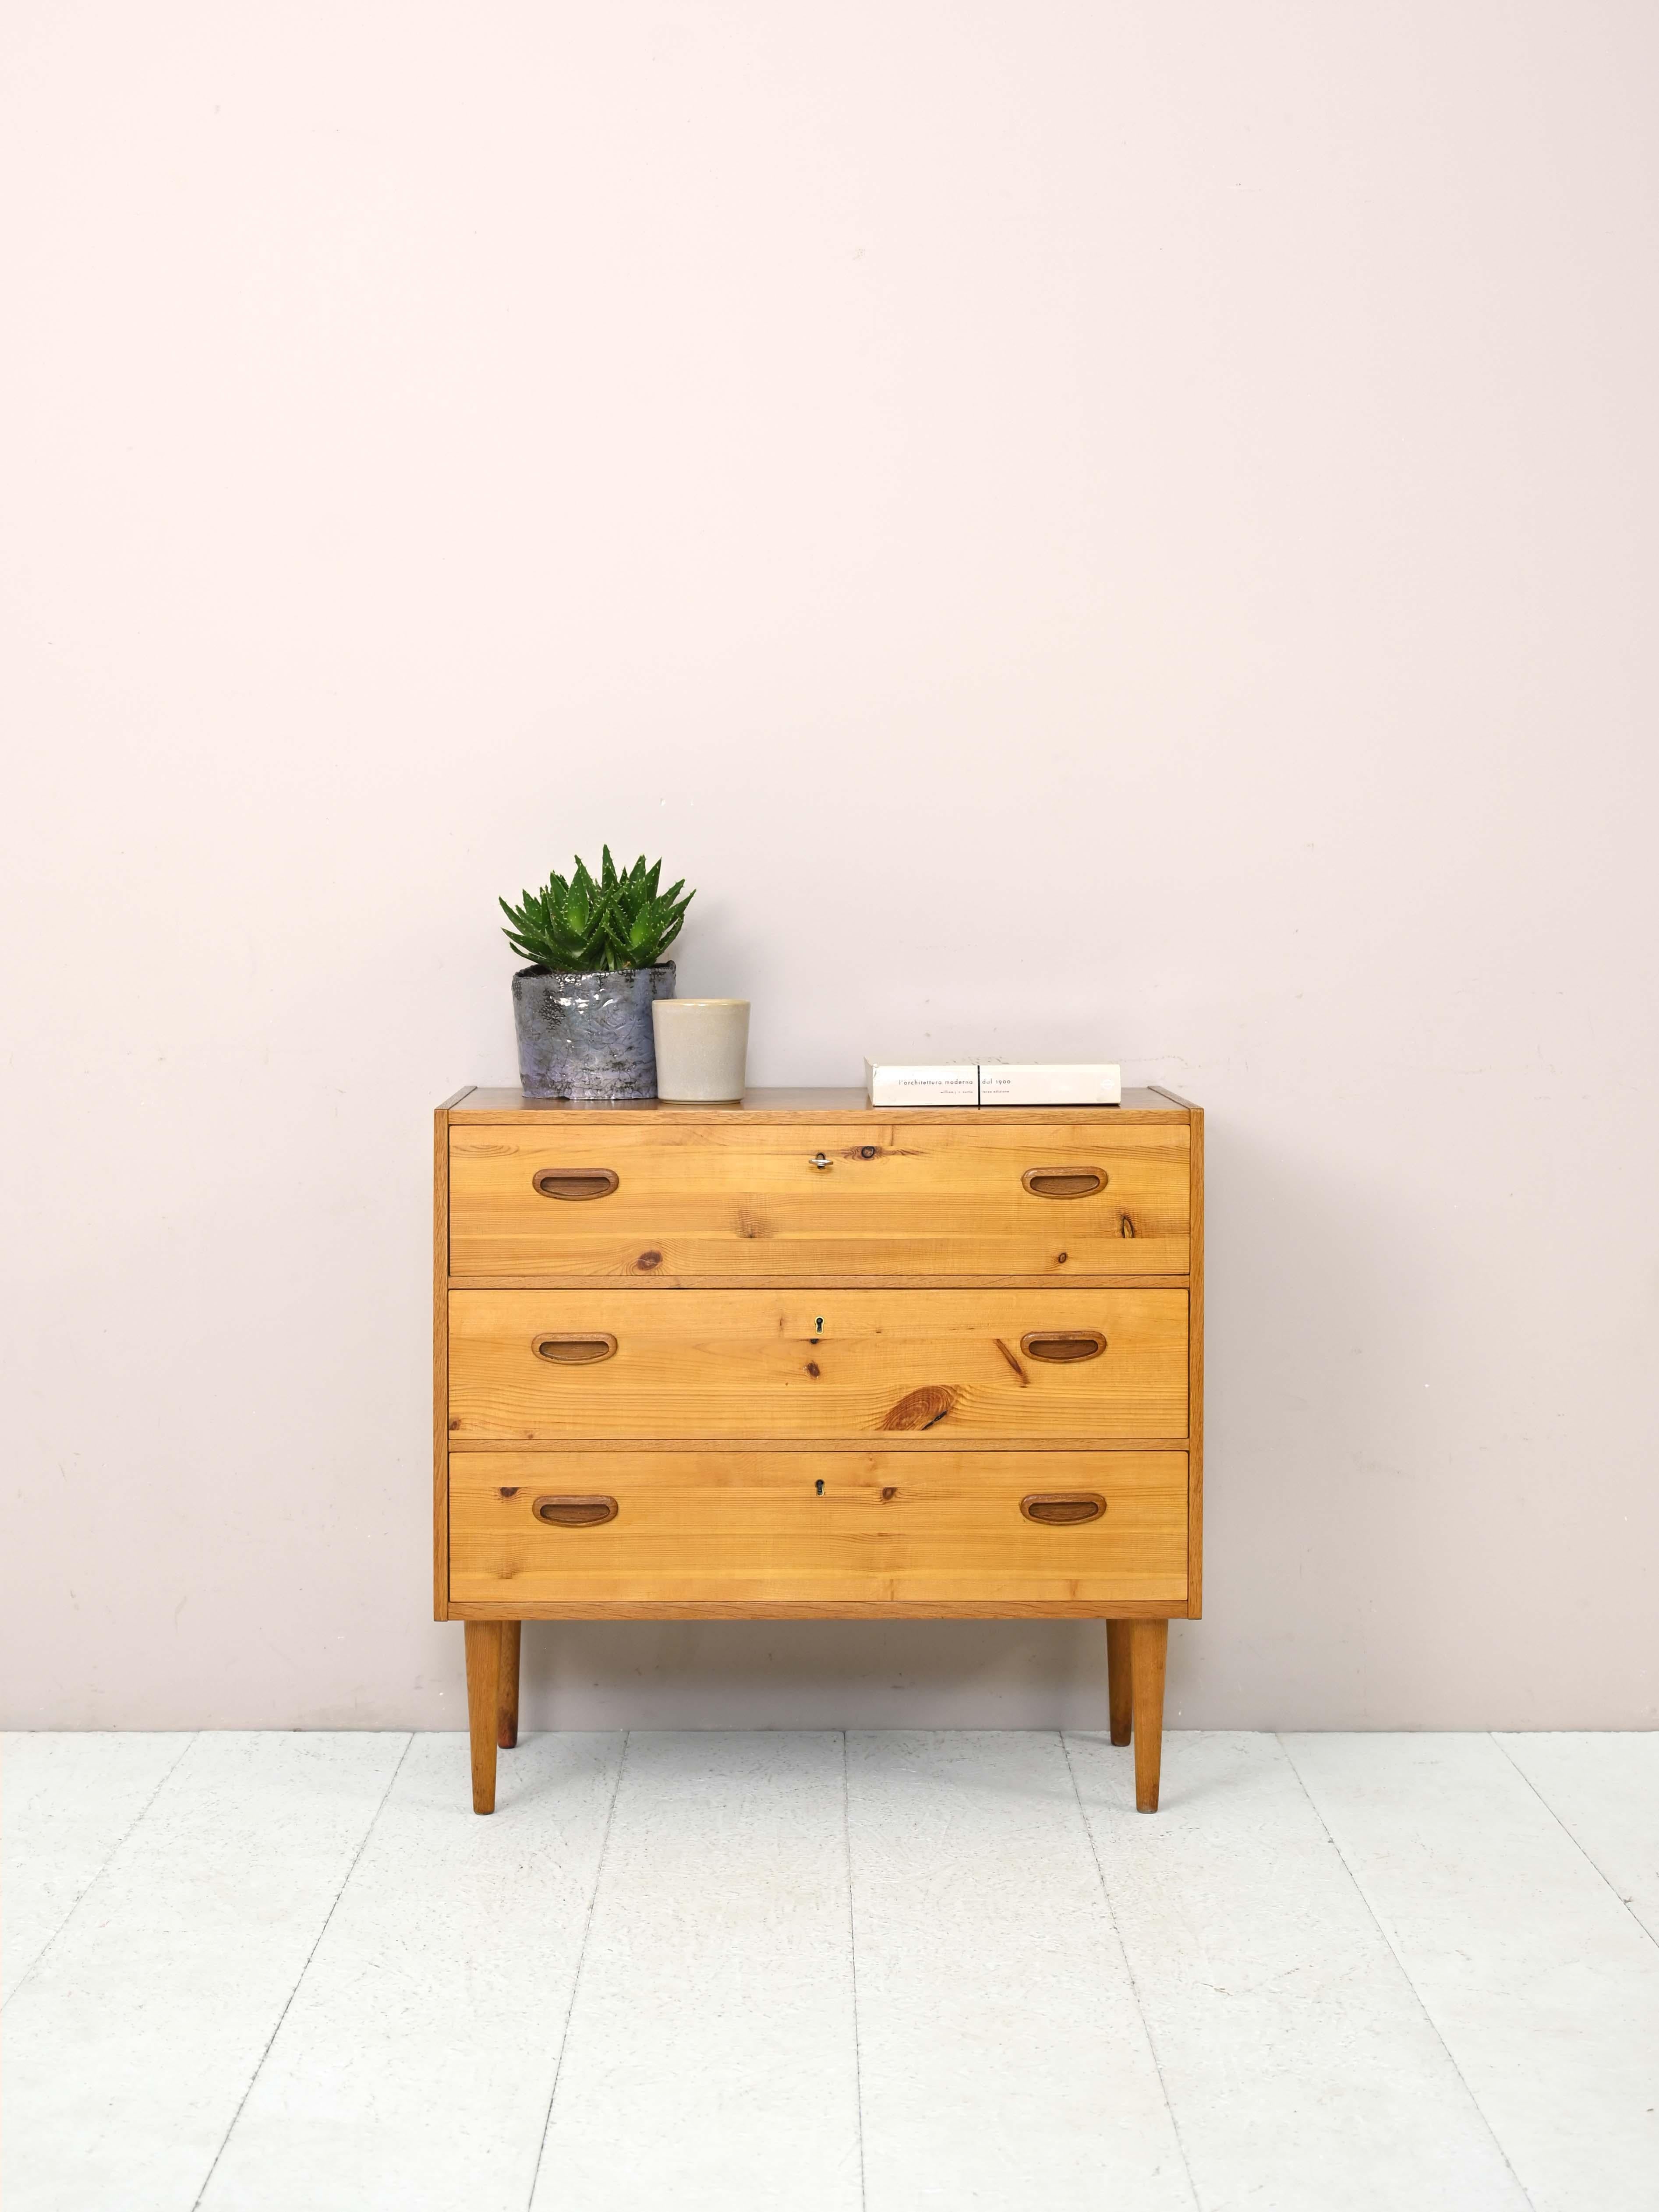 Vintage teak and pine chest of drawers.

A modern piece of furniture that is distinguished by its pine wood drawers characterized by pronounced grain. The rest of the frame is teak wood as is the carved handle of the drawers.
The tapered legs are